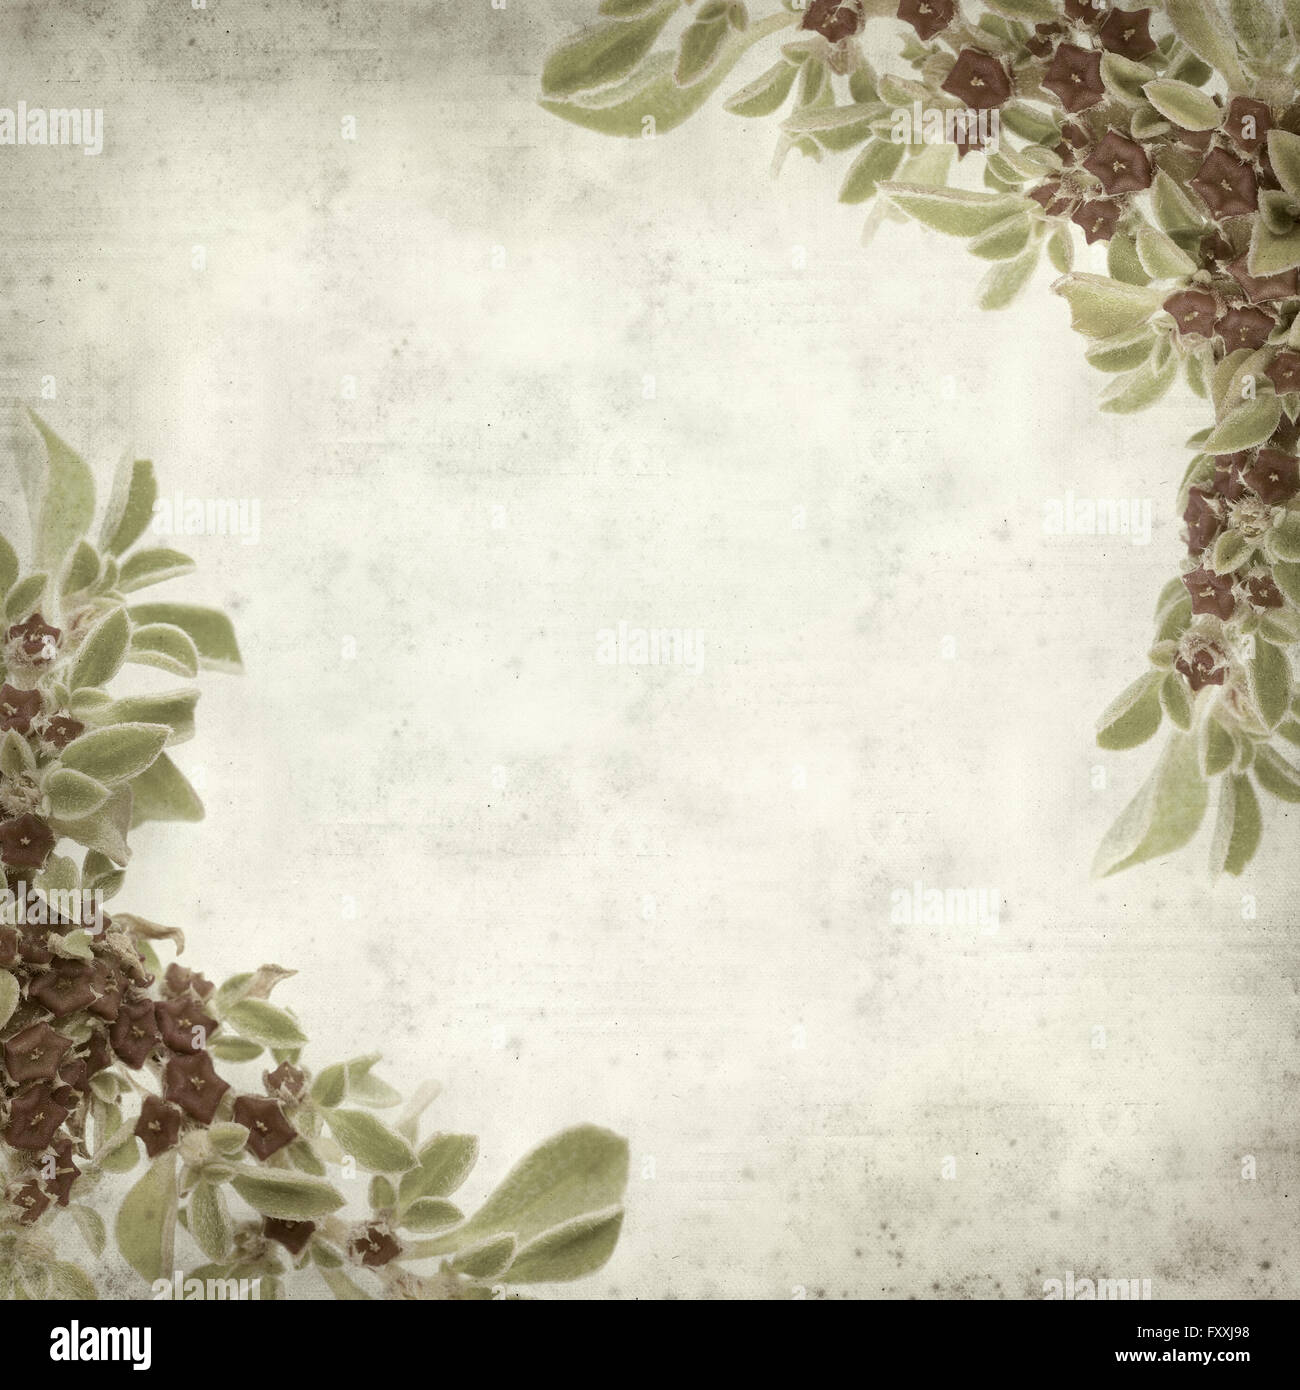 textured old paper background with succulent plant  Aizoon canariense, Canarian iceplant Stock Photo